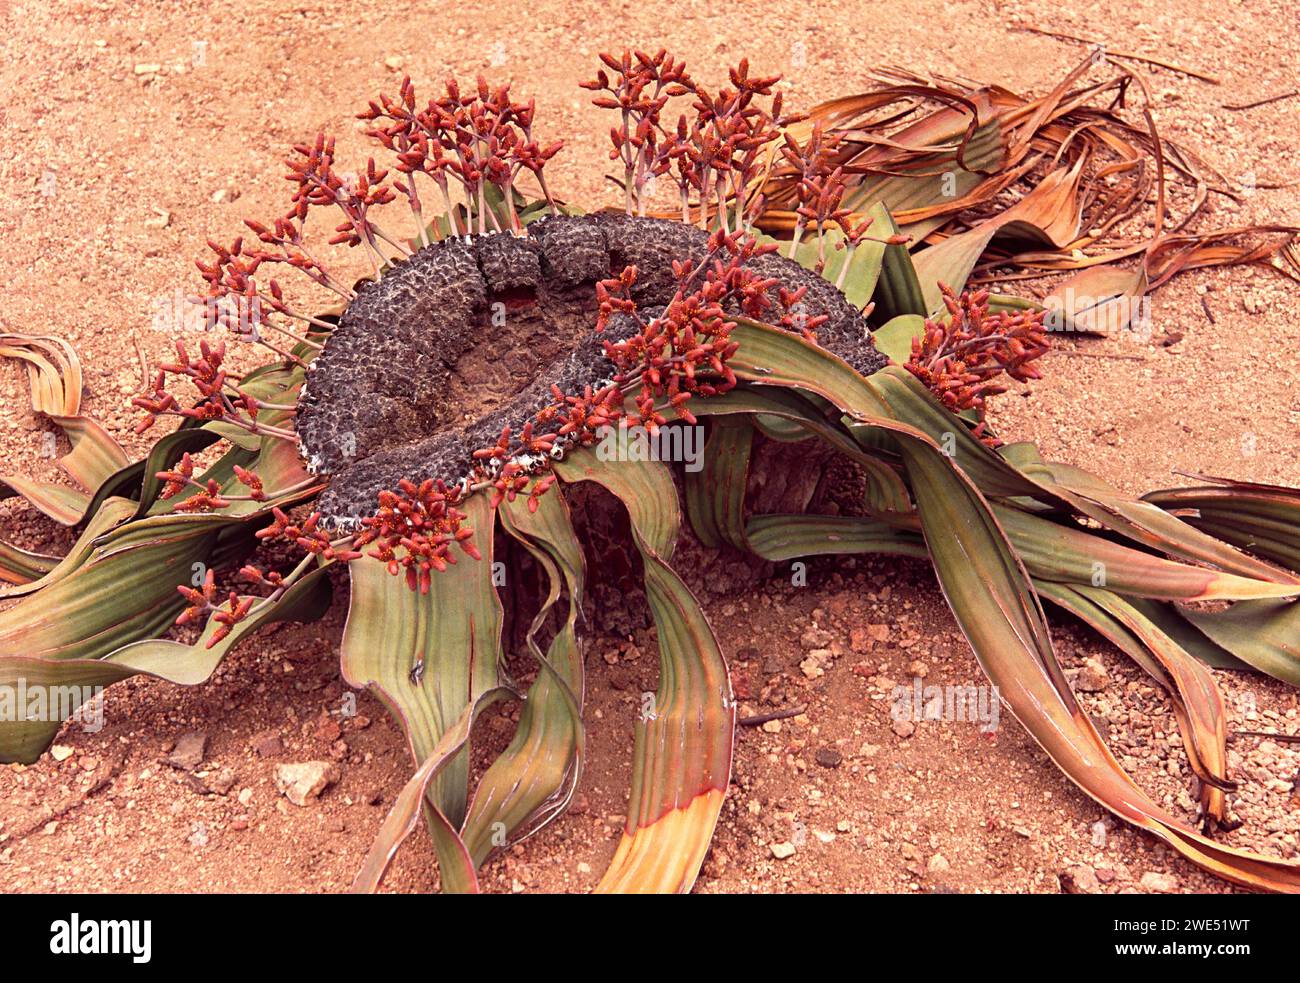 Welwitschia mirabilis female plant with flowers and cones Namibia Stock Photo